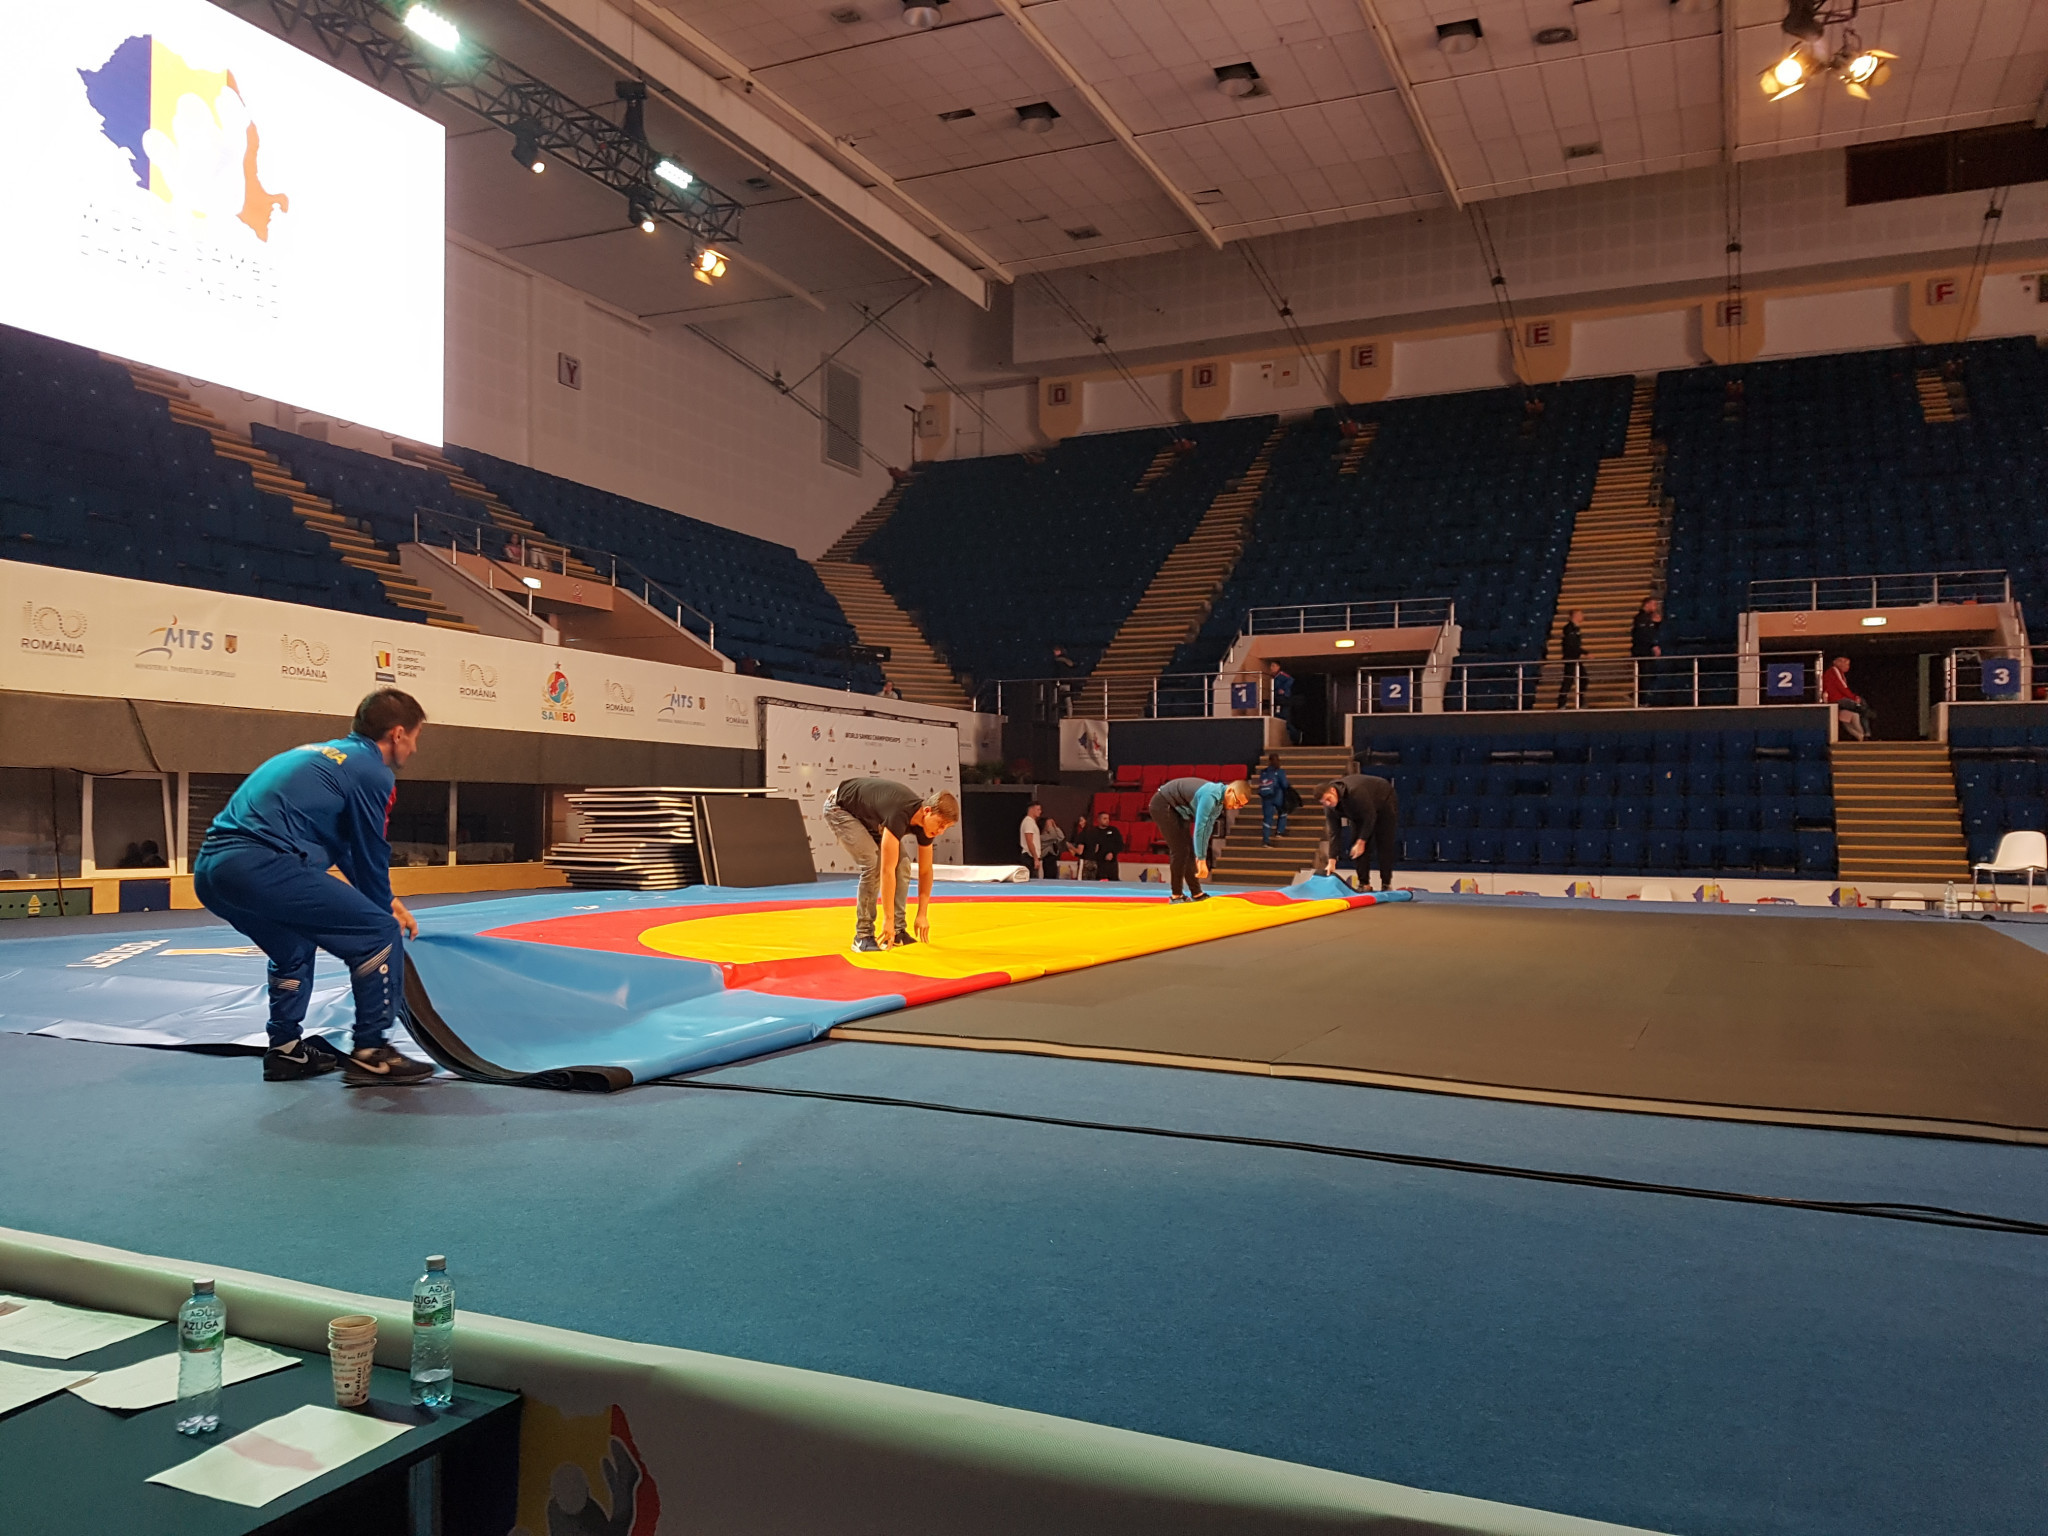 When the Championships ended work immediately began to dismantle FIAS' equipment ©ITG